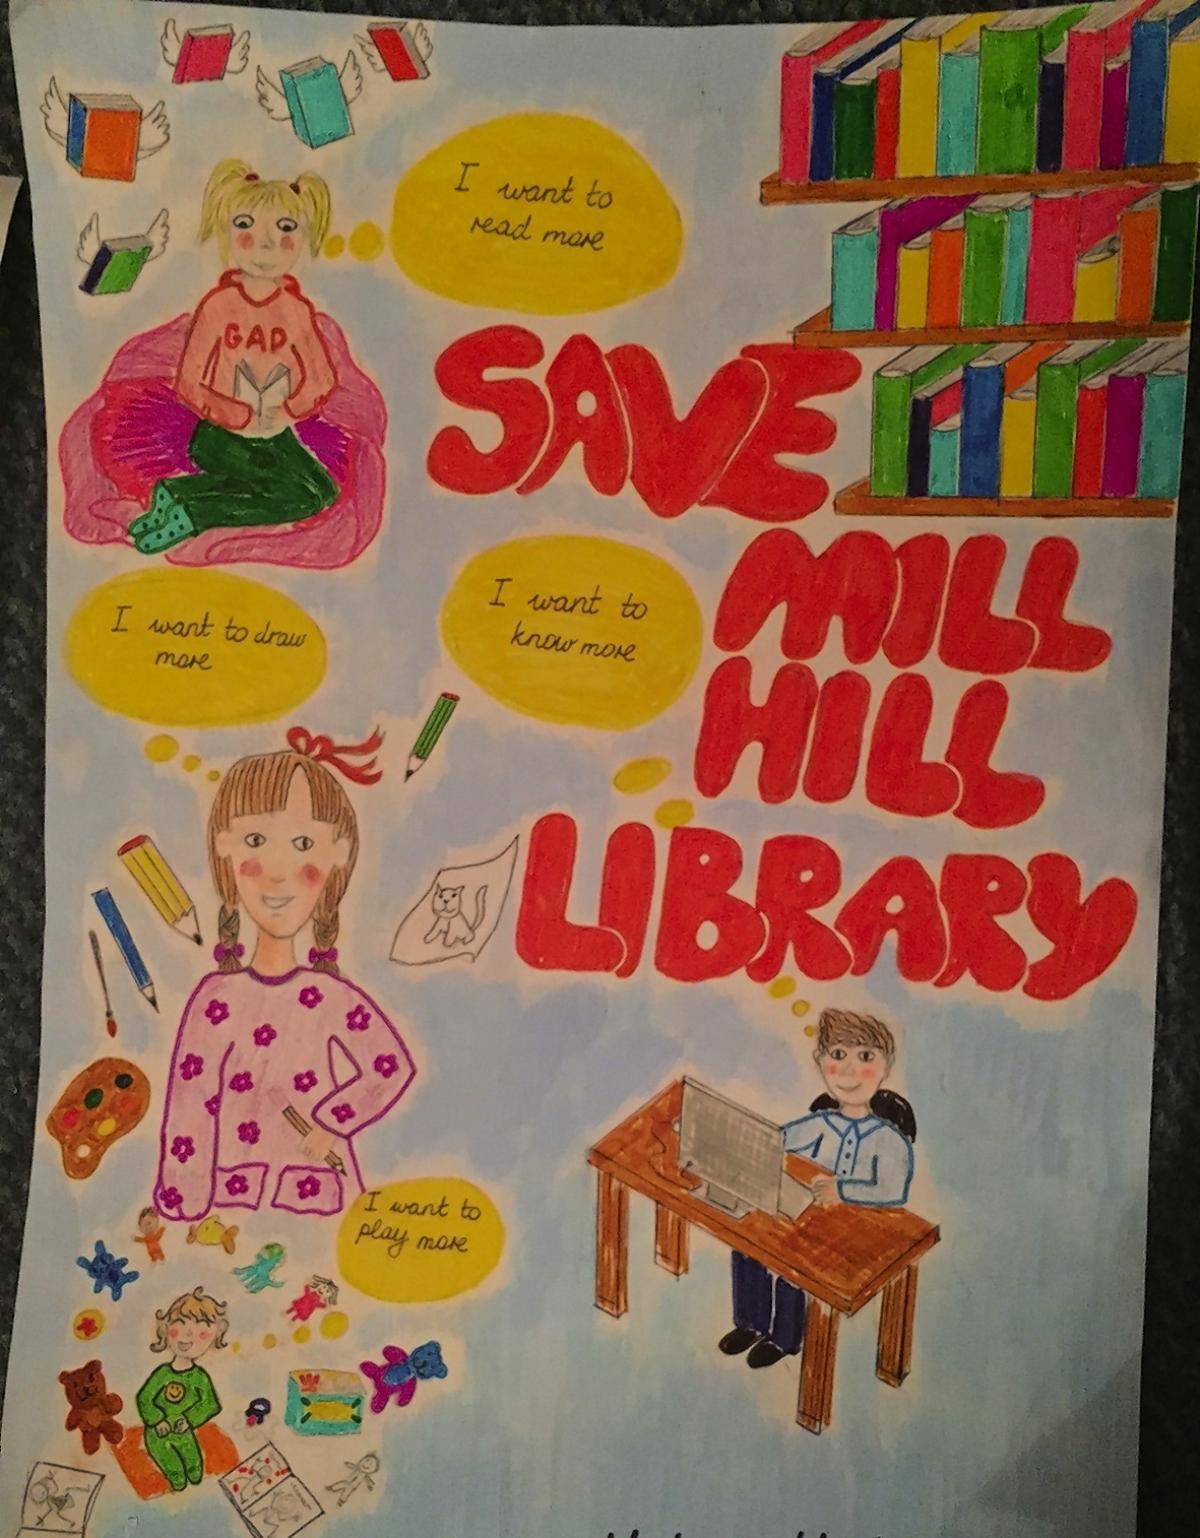 Schoolchildren in Barnet wrote letters and designed posters to save their libraries from closure.